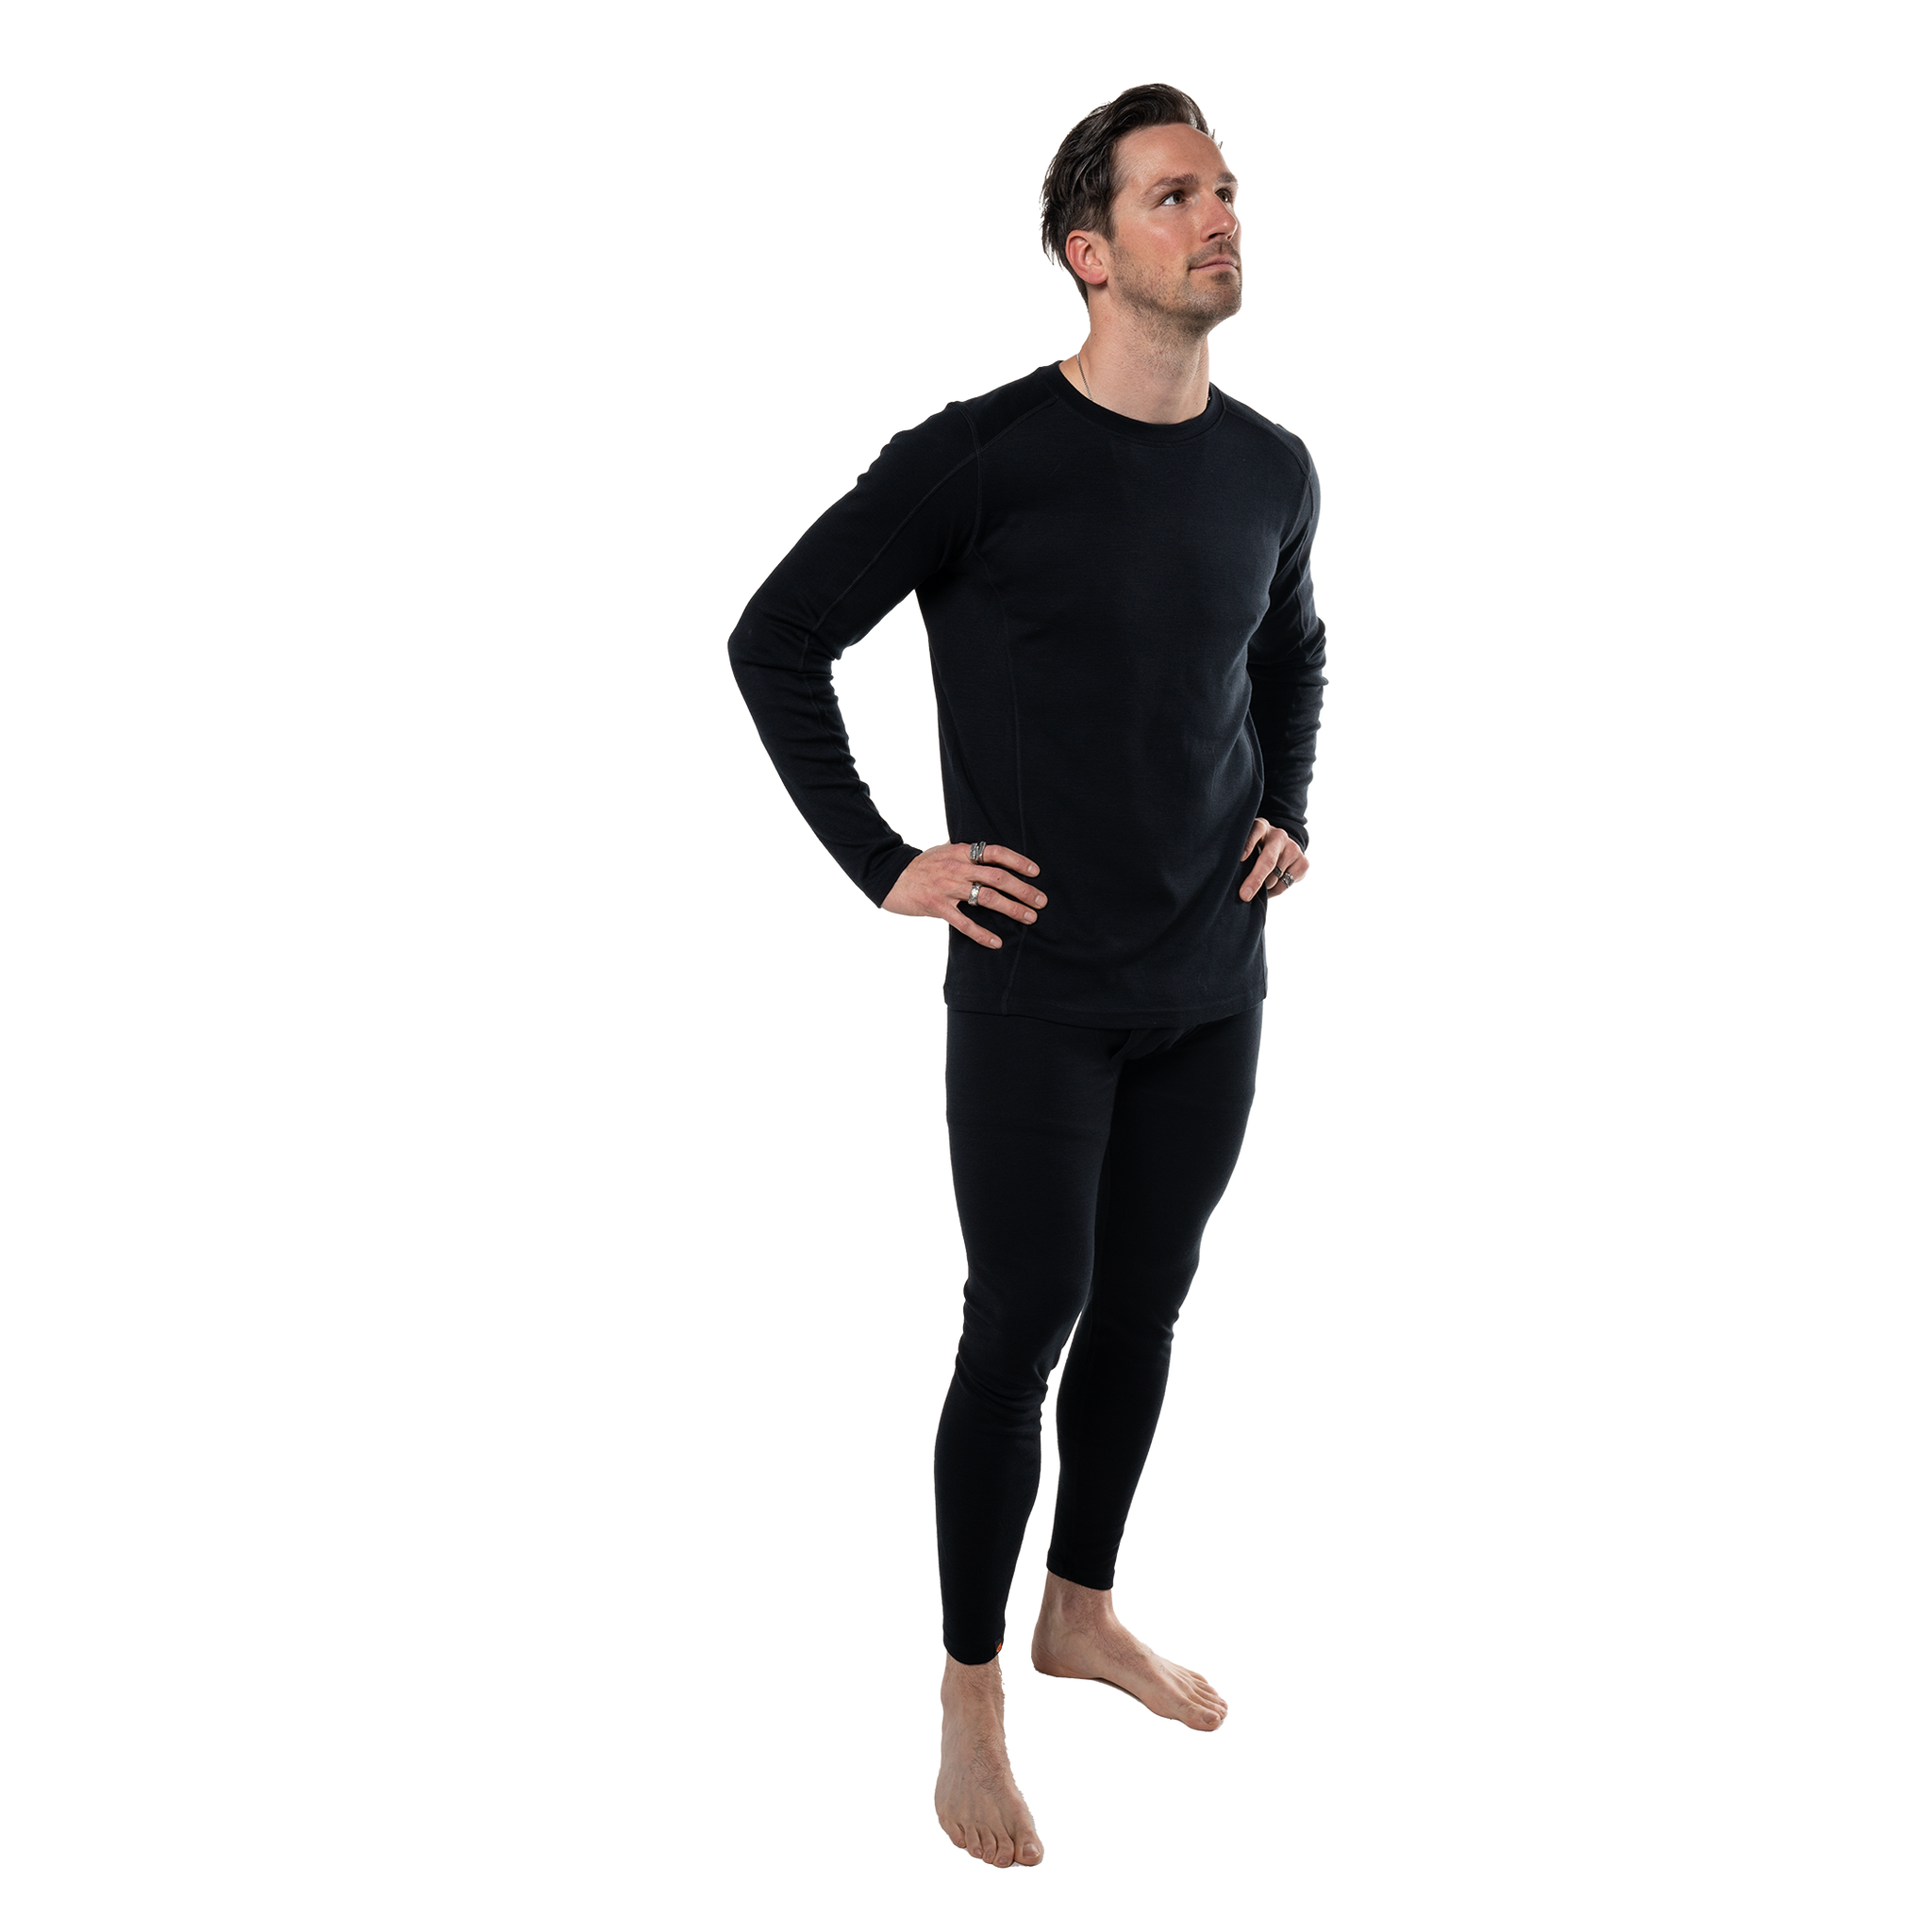 O-Neck Shirt Base Thermal Underwear,Long Johns For Women,Thermal Clothing  Second Skin Winter Thermal Suit